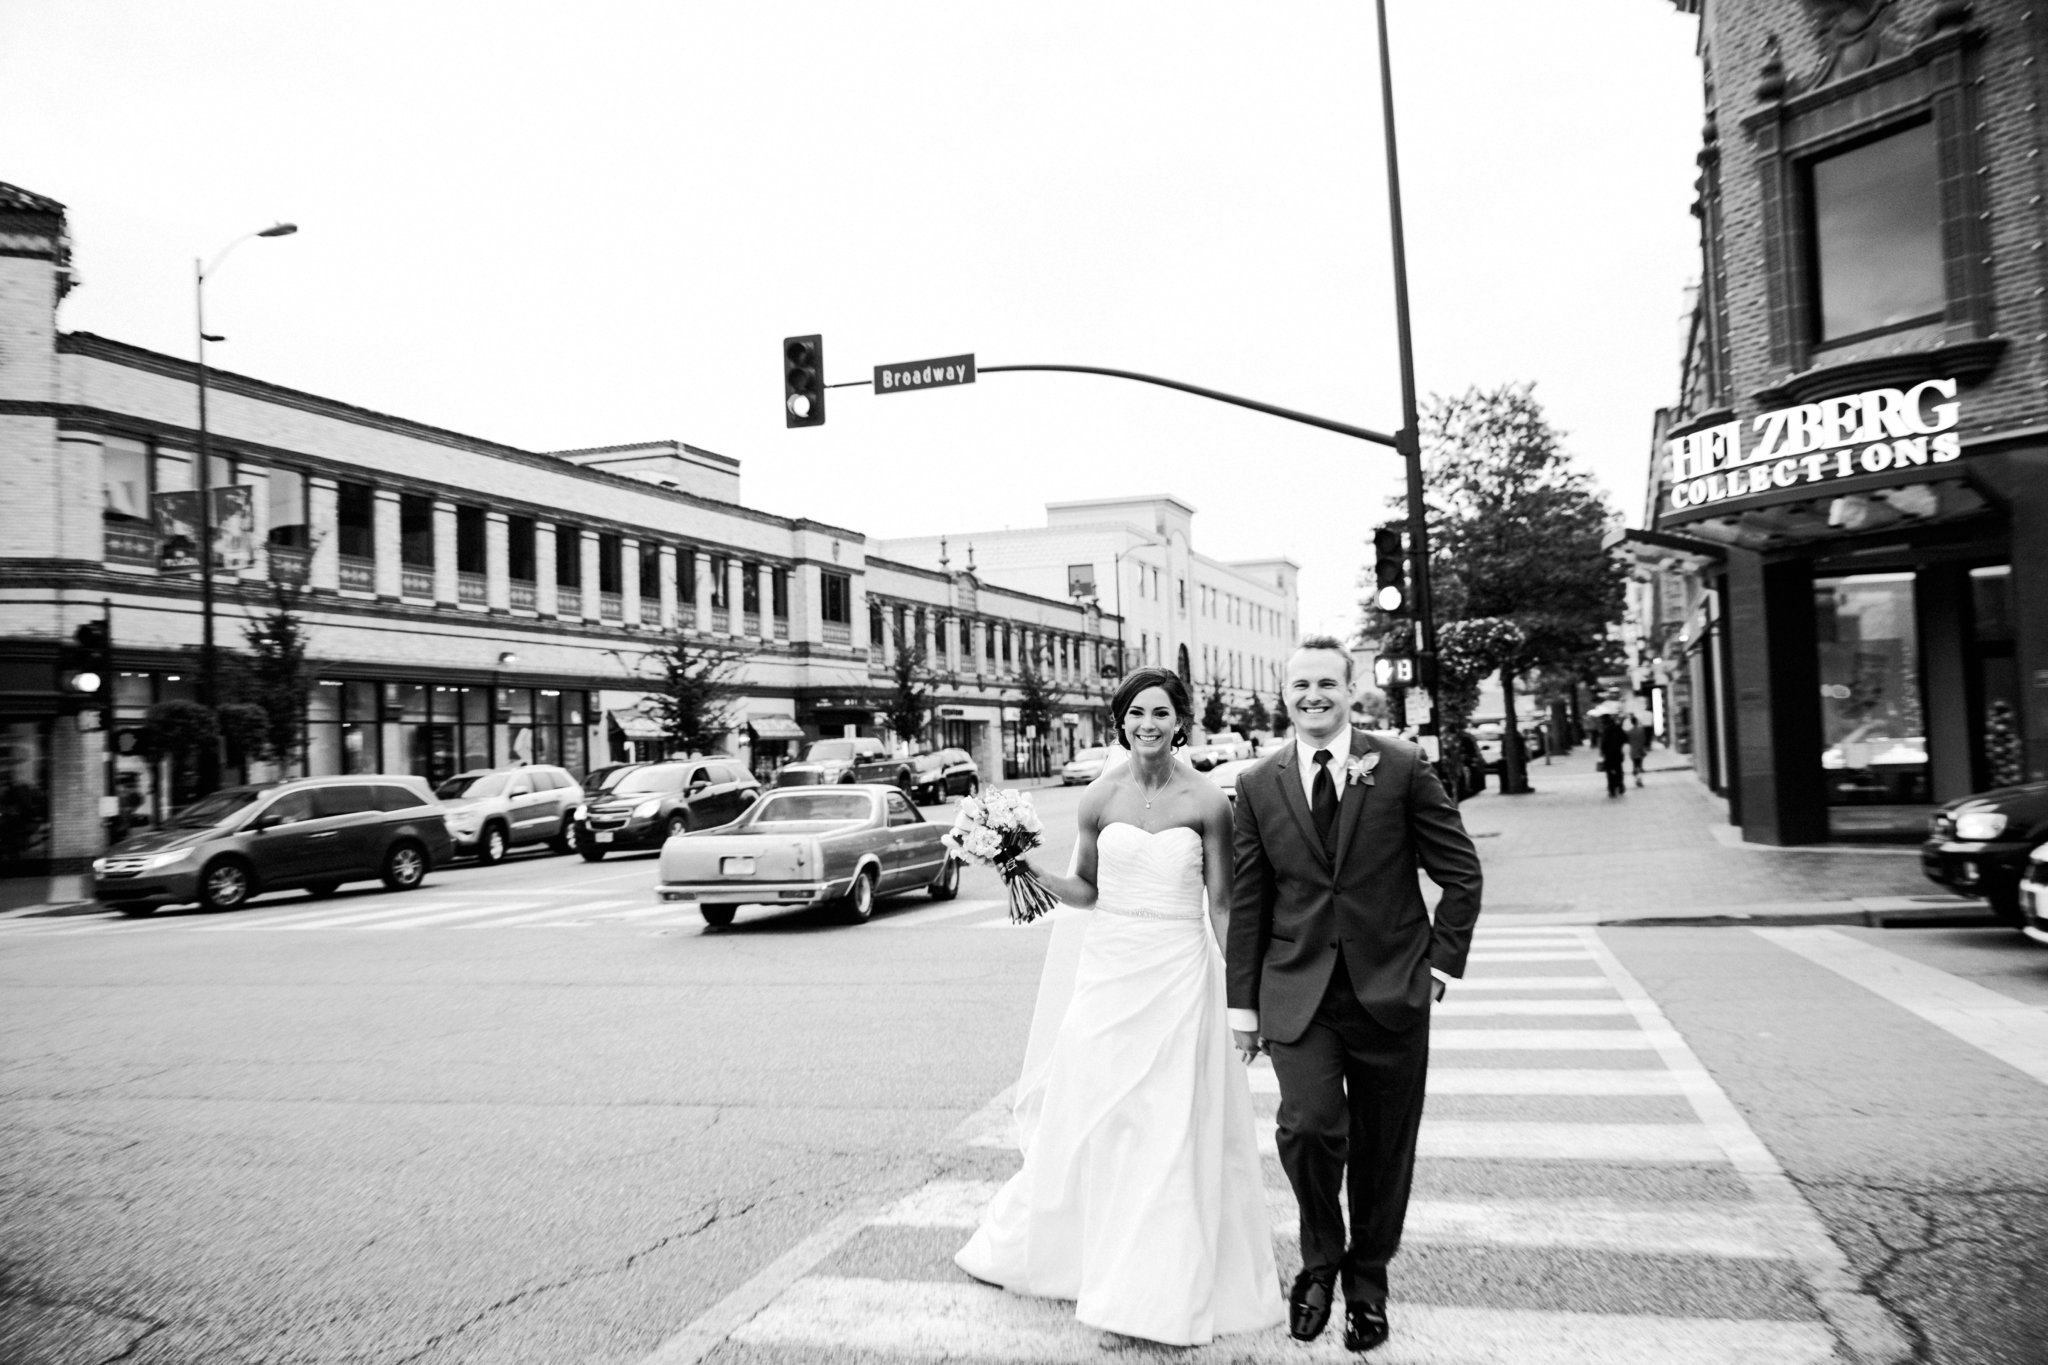 black and white | wedding | wedding photos | wedding photography | images by feliciathephotographer.com | Country Club Plaza | Kansas City | Unity Temple | crosswalk | candid | man and wife | Broadway 